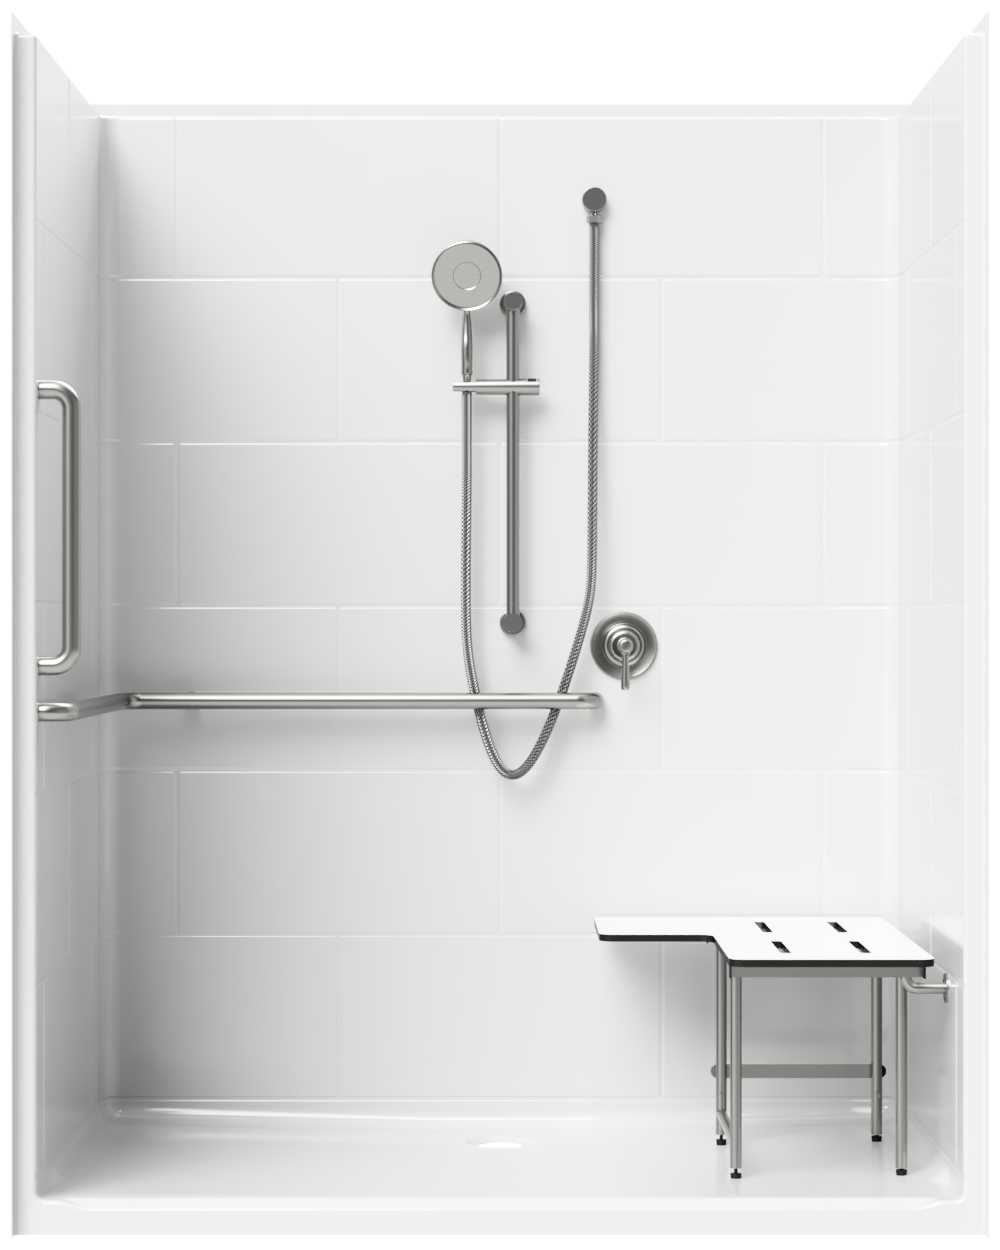 5’ Roll-in Shower With Simulated Tile and Shelf